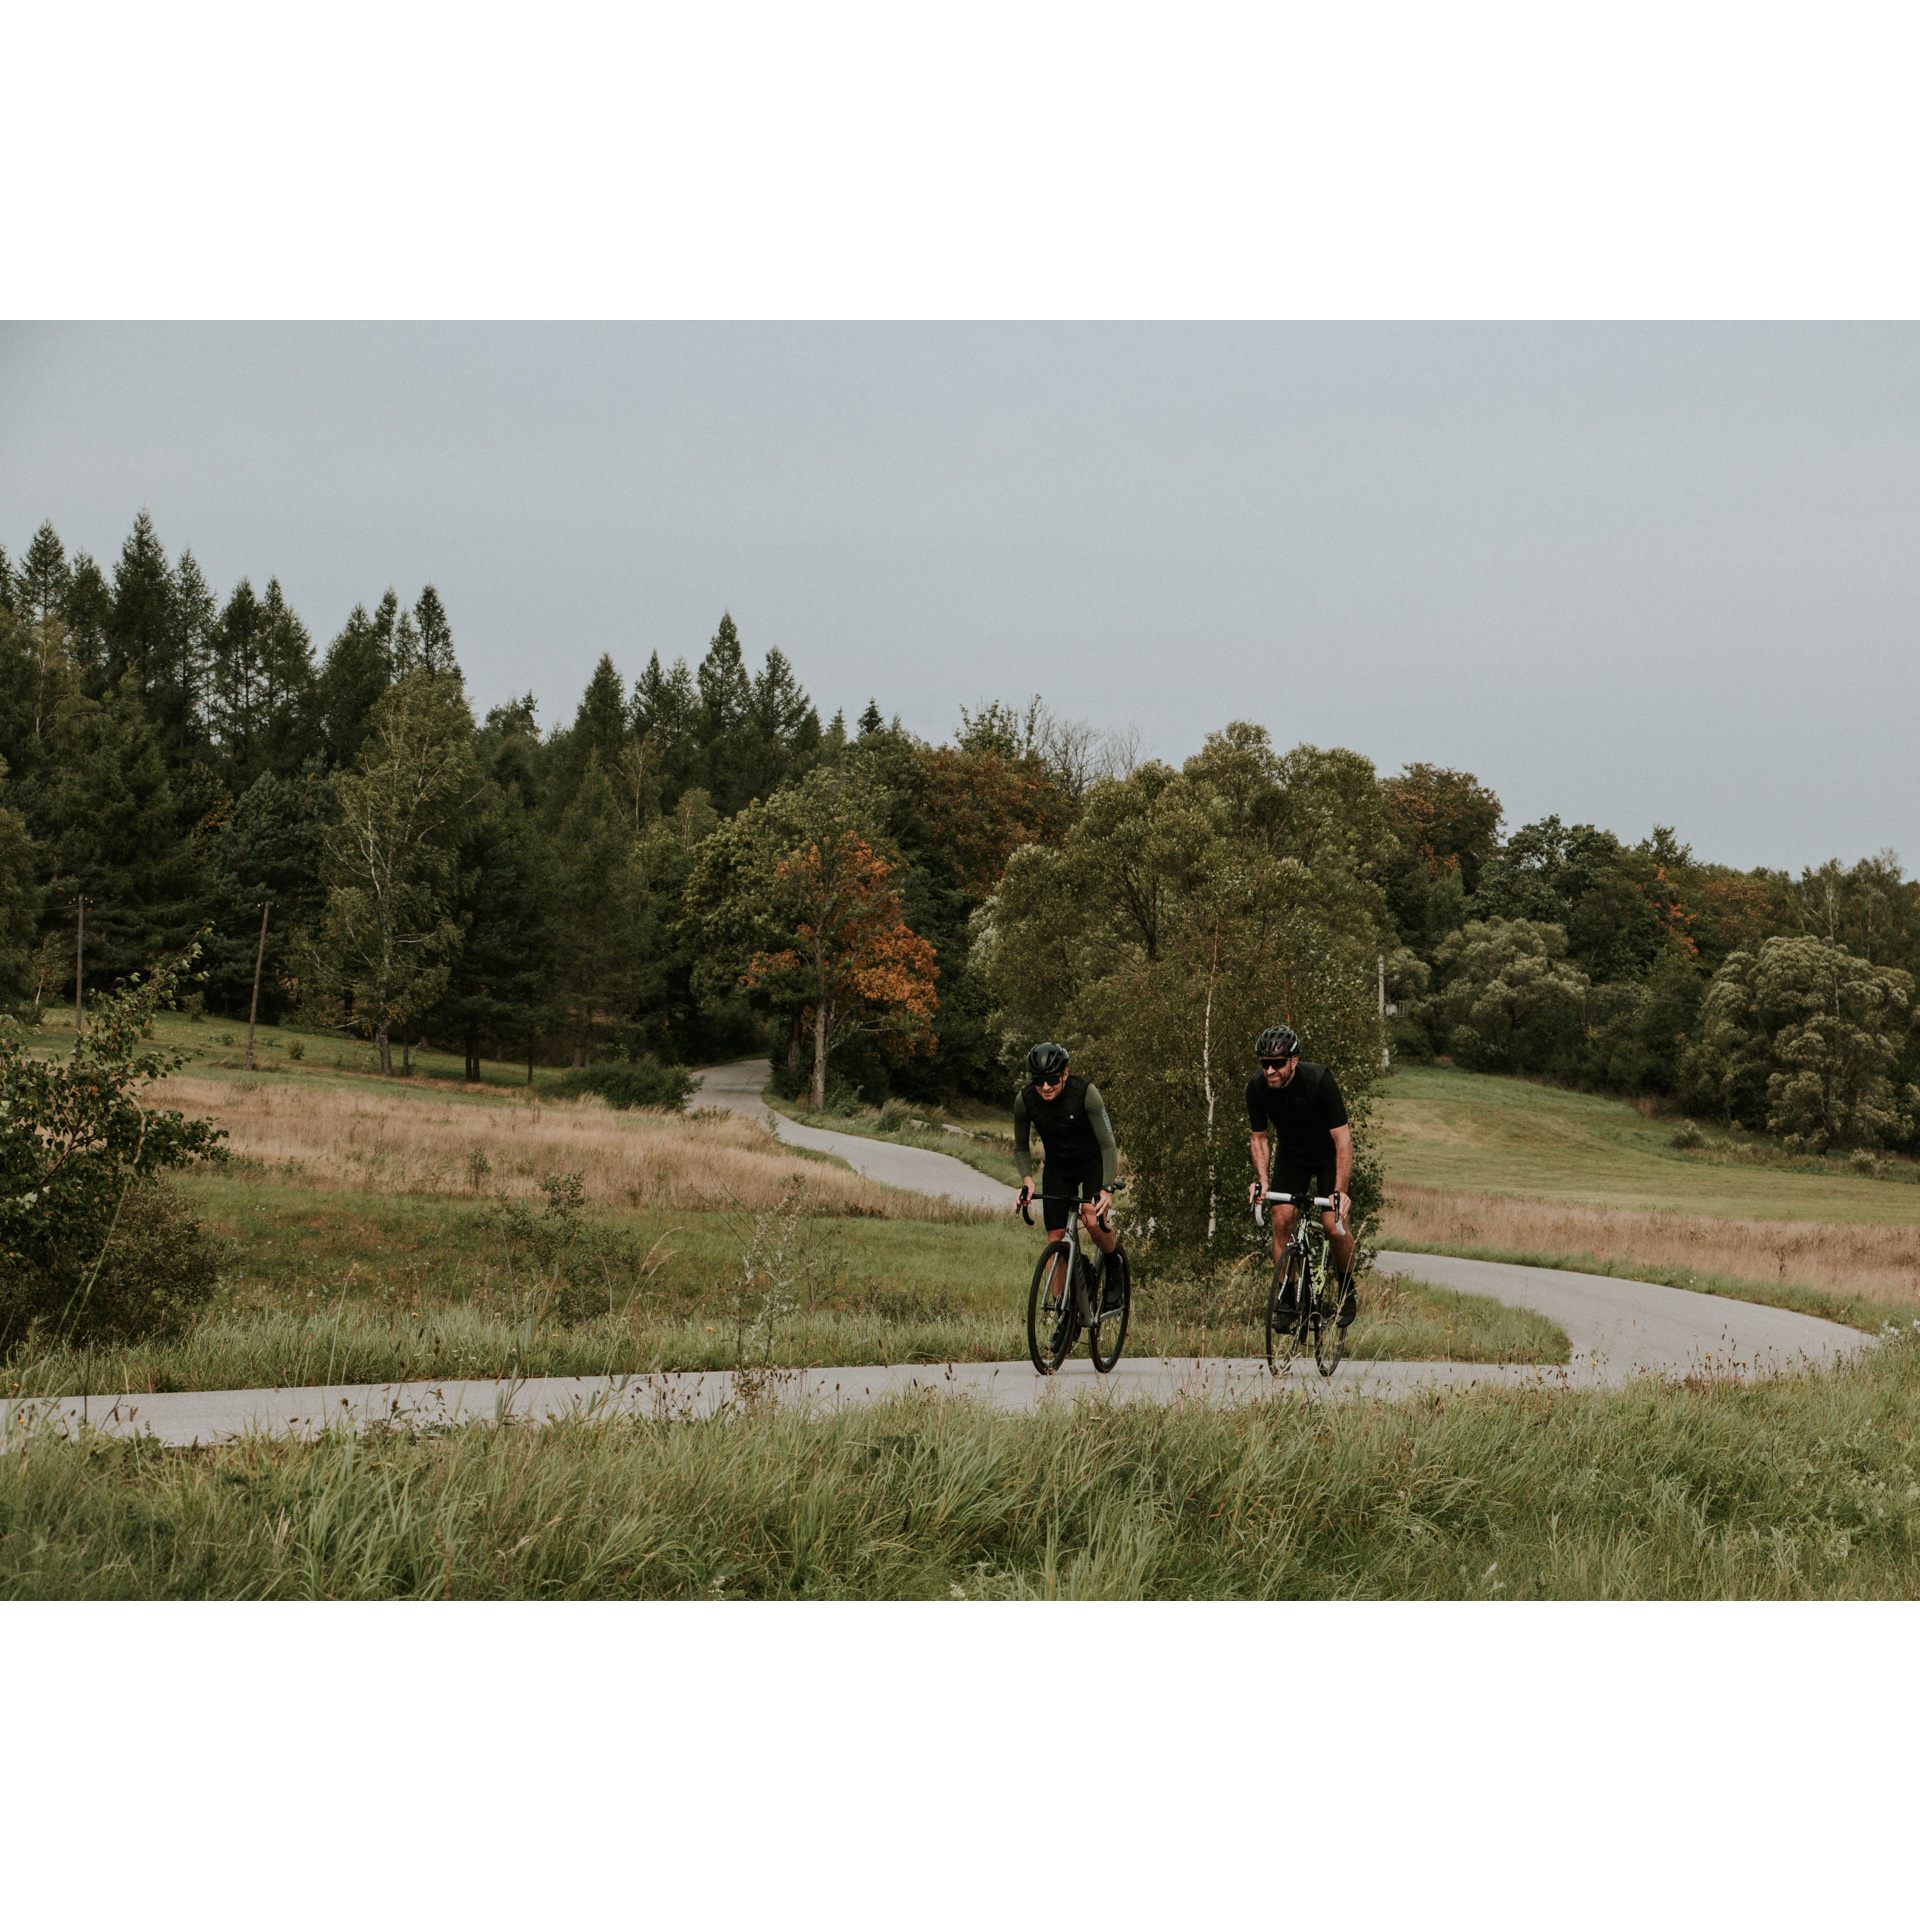 Two cyclists in black clothes leaving the bend on an asphalt road against the background of a green forest